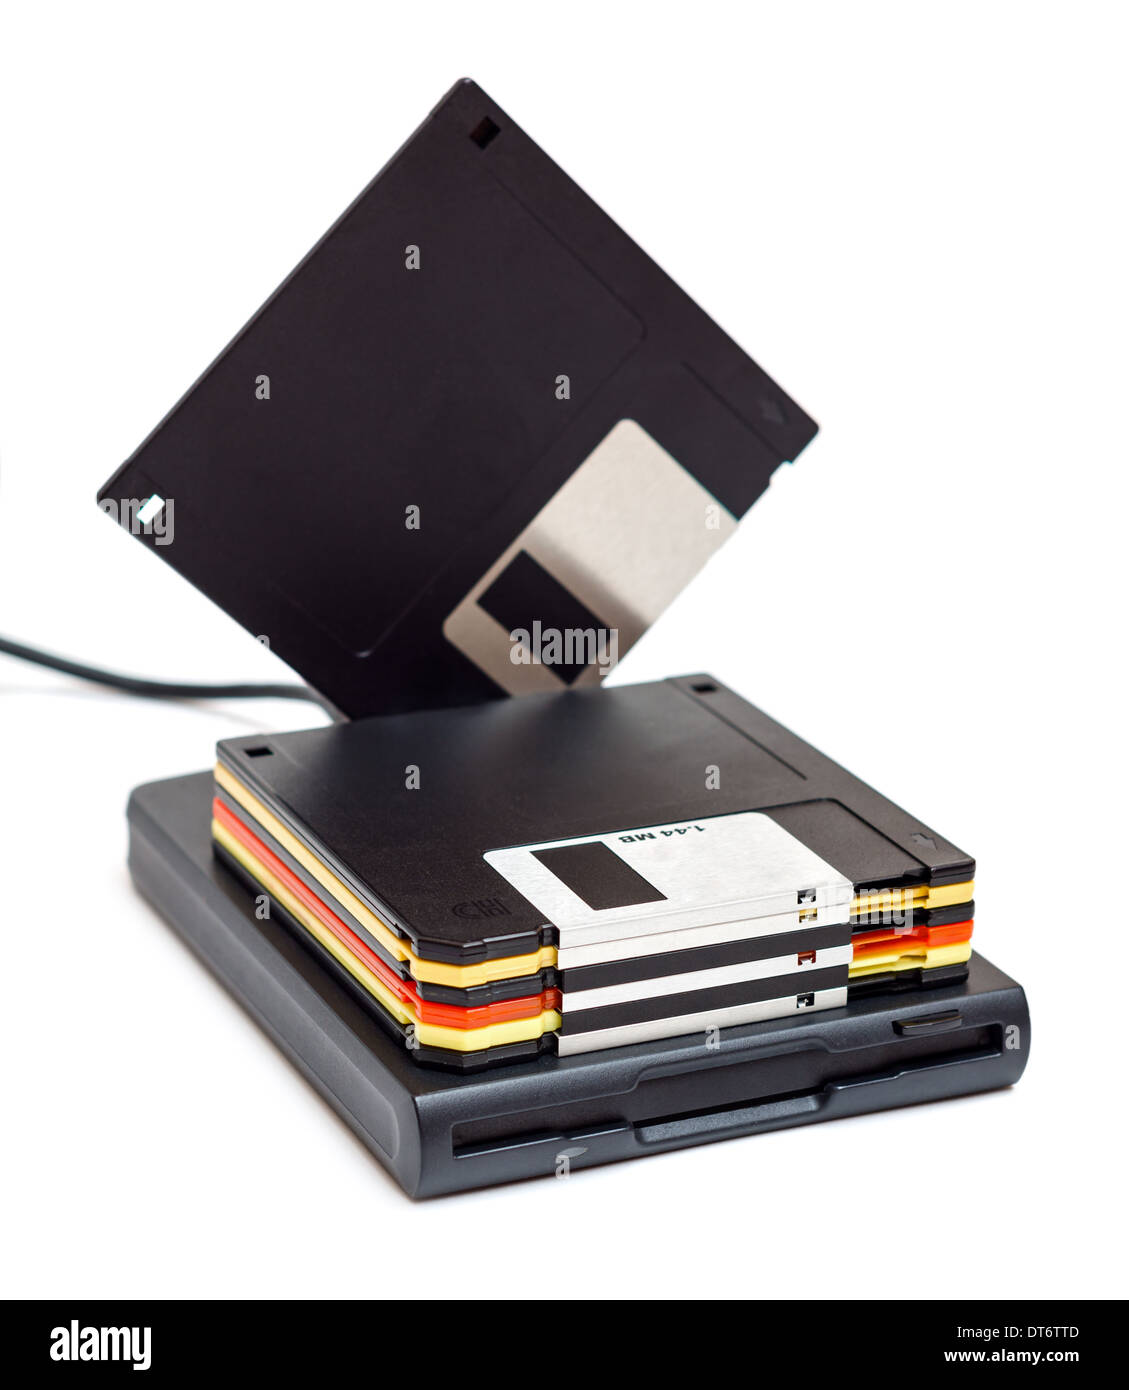 External usb floppy disk drive with disks, one standing isolated on white background Stock Photo